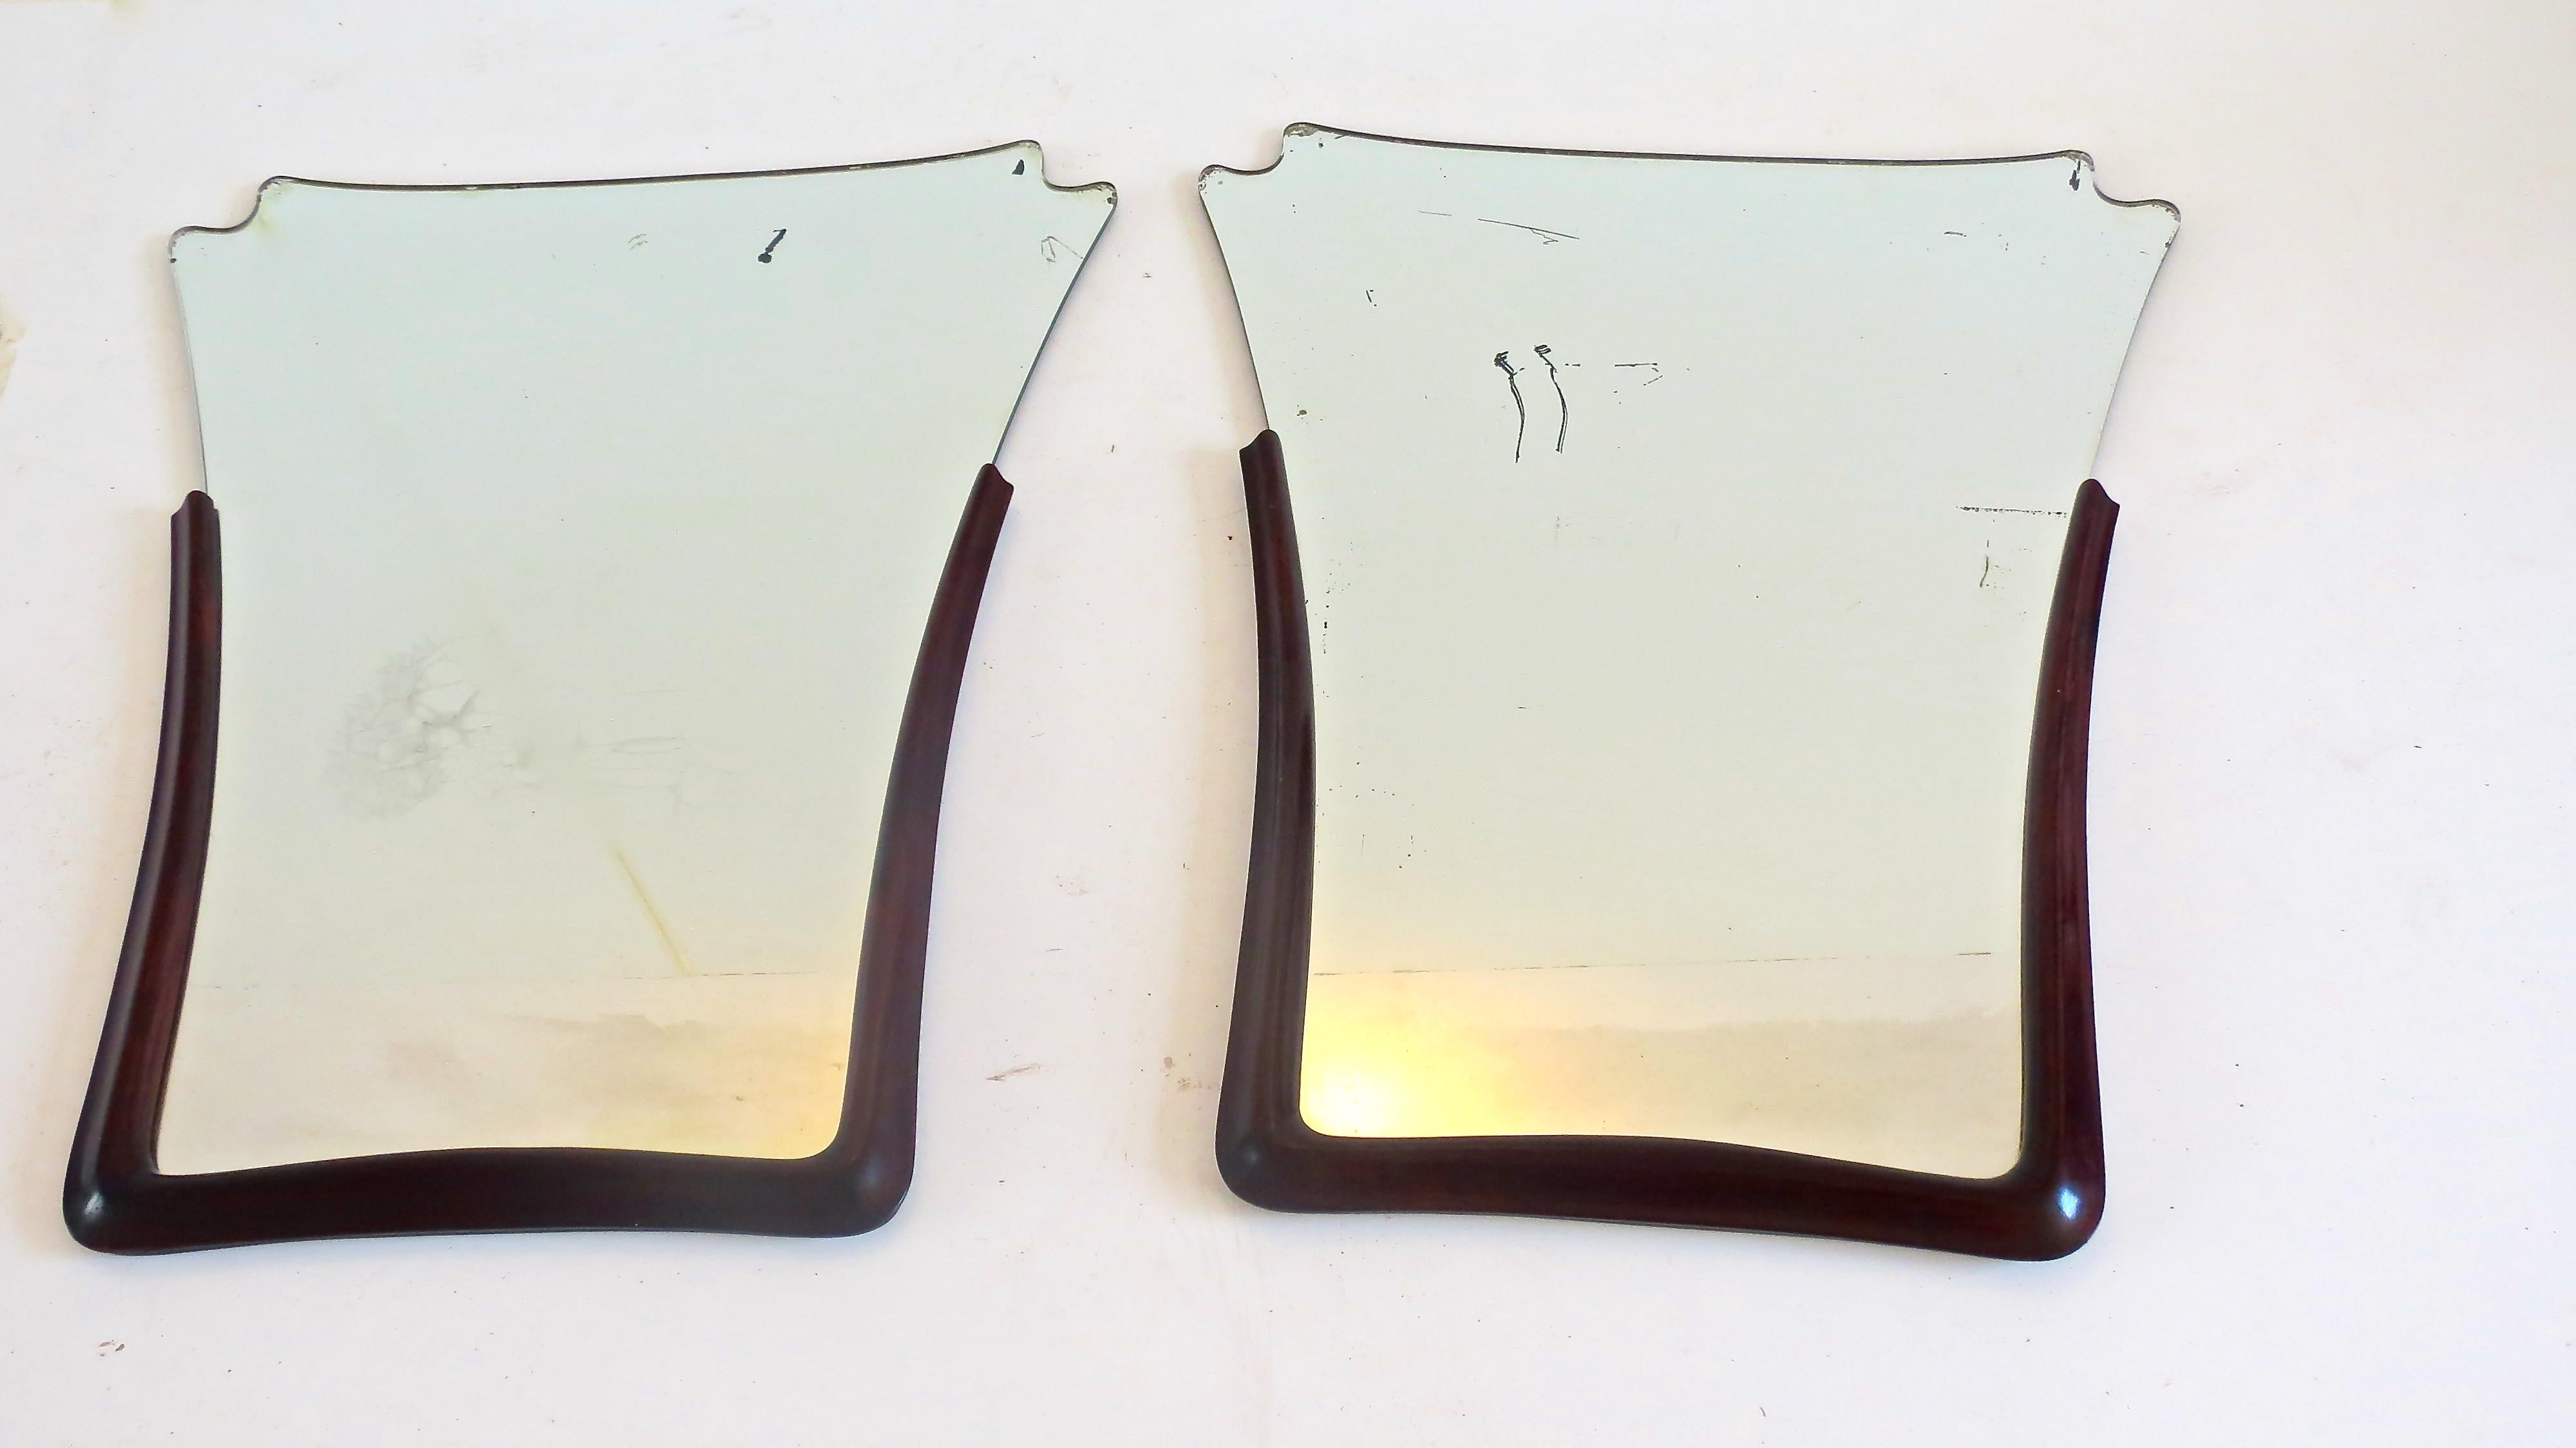 Pair unique wall mirrors by arch. Maurizio Temepstini, 1940-1950
produced for a private residence in Florence
unique example
walnut, mirror
Very good original patina
Signed retro 